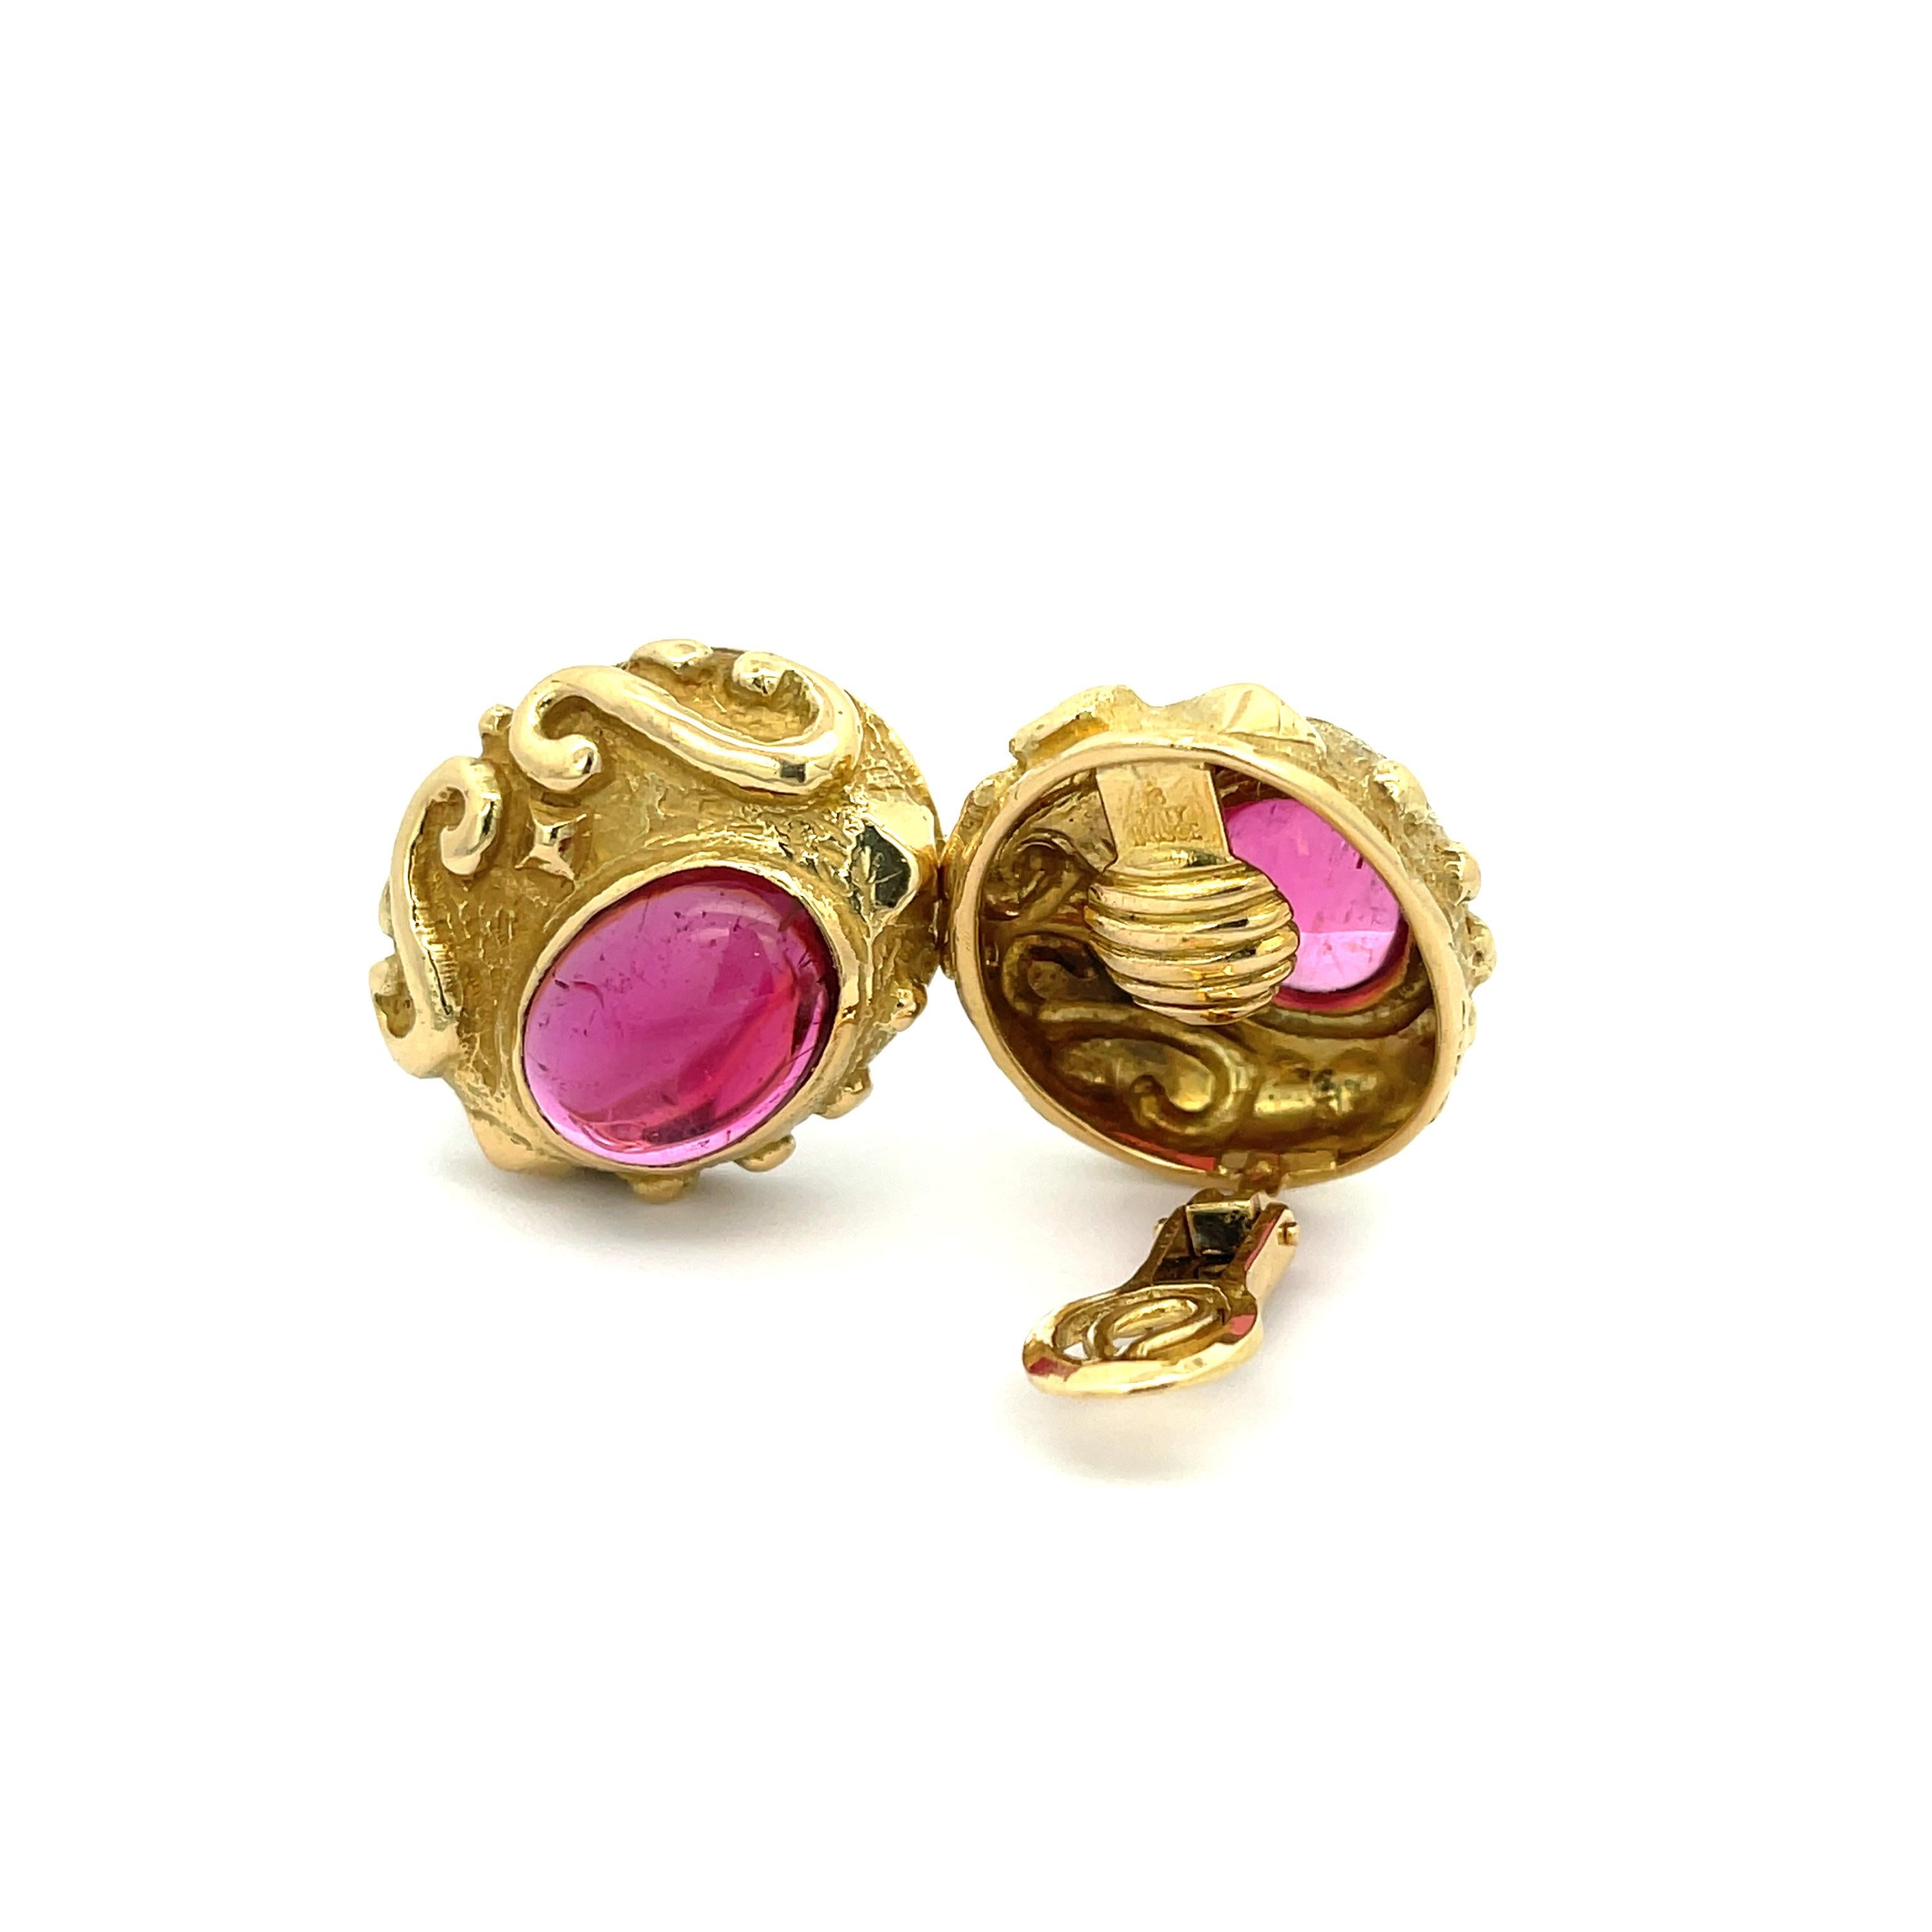 Katy Briscoe Cabochon Rubellite Earrings in 18K Yellow Gold. The earrings feature a matched pair of vibrant pink Rubellites with 15.52ctw. The earrings are accented by heavy scrollwork. 
26.7 grams
